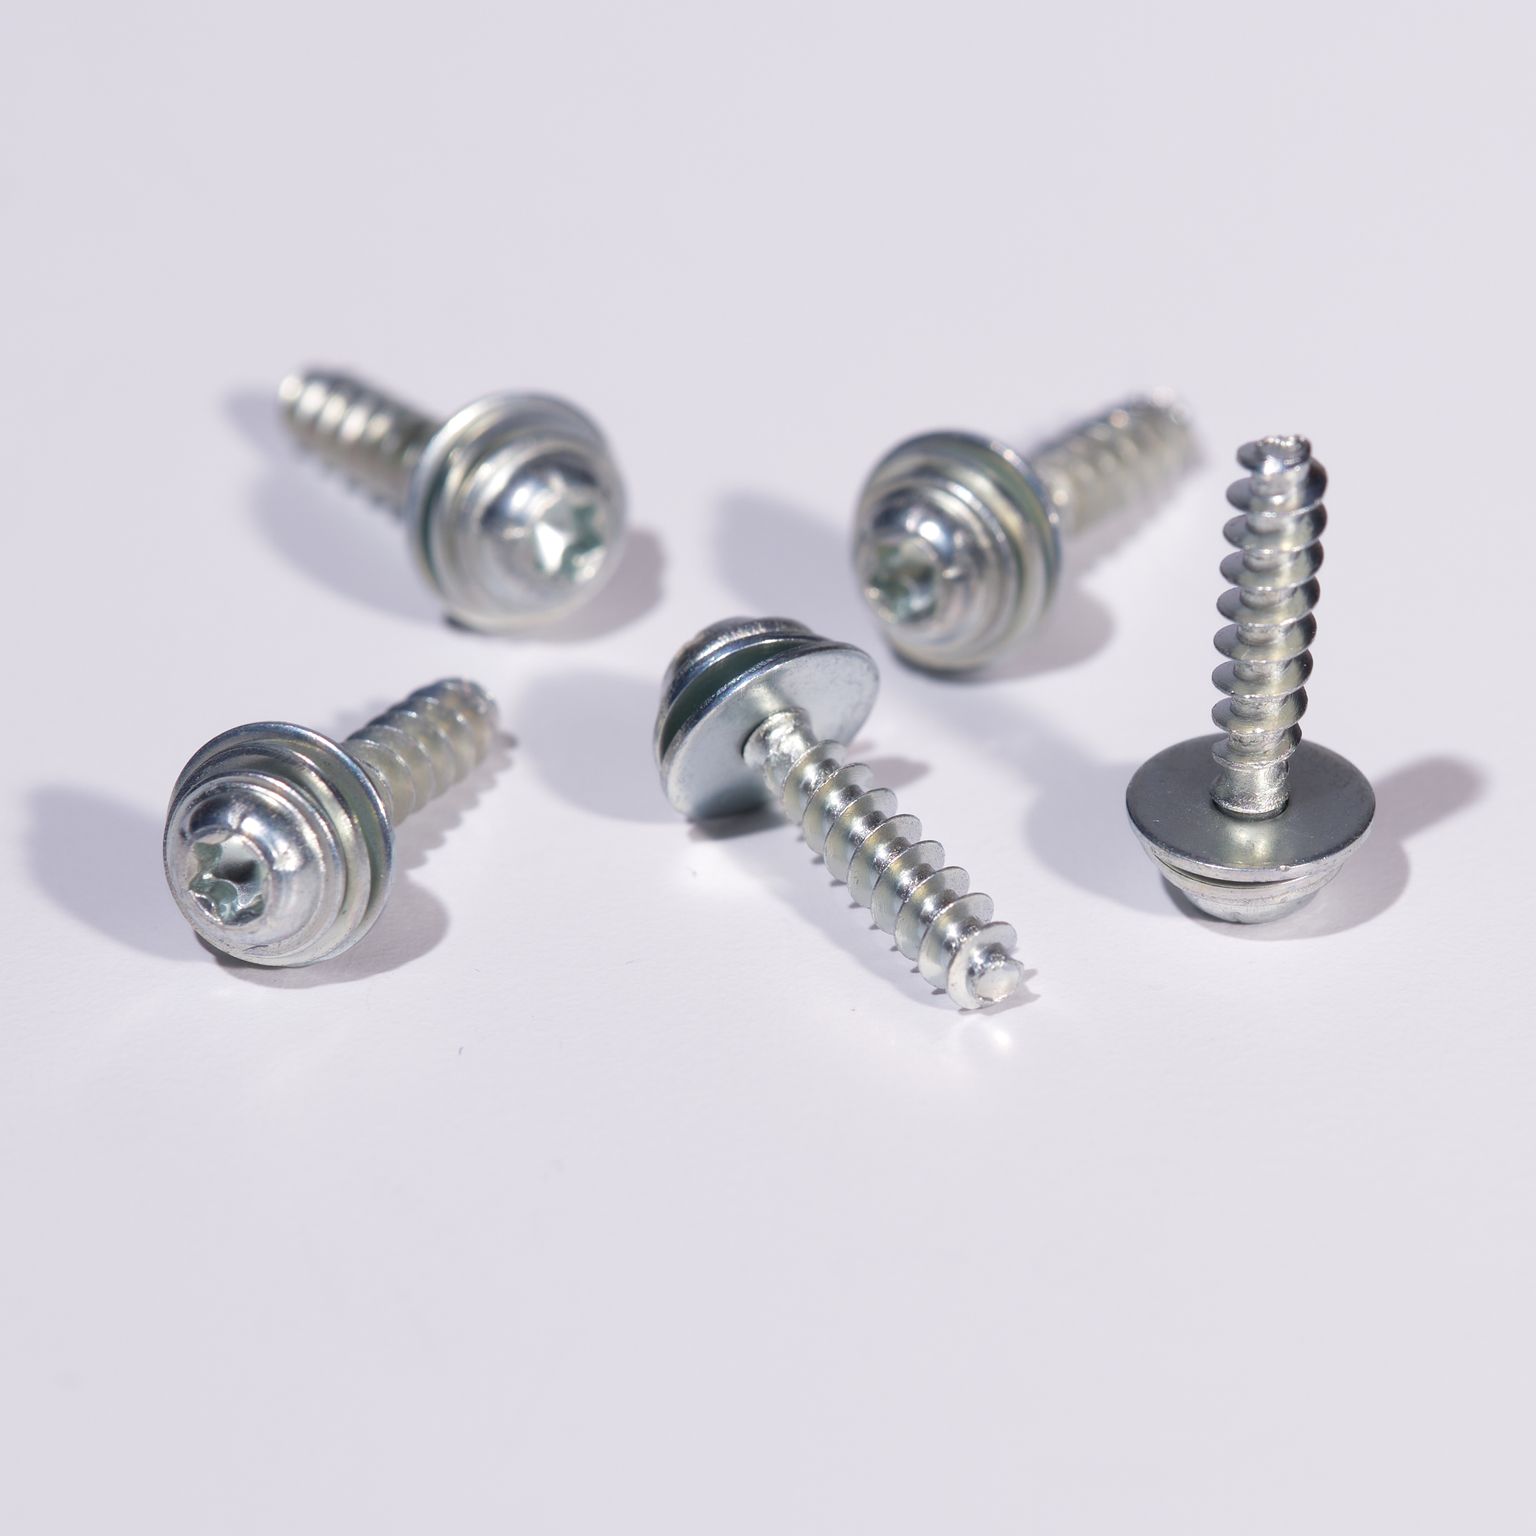 Captive screw with washer